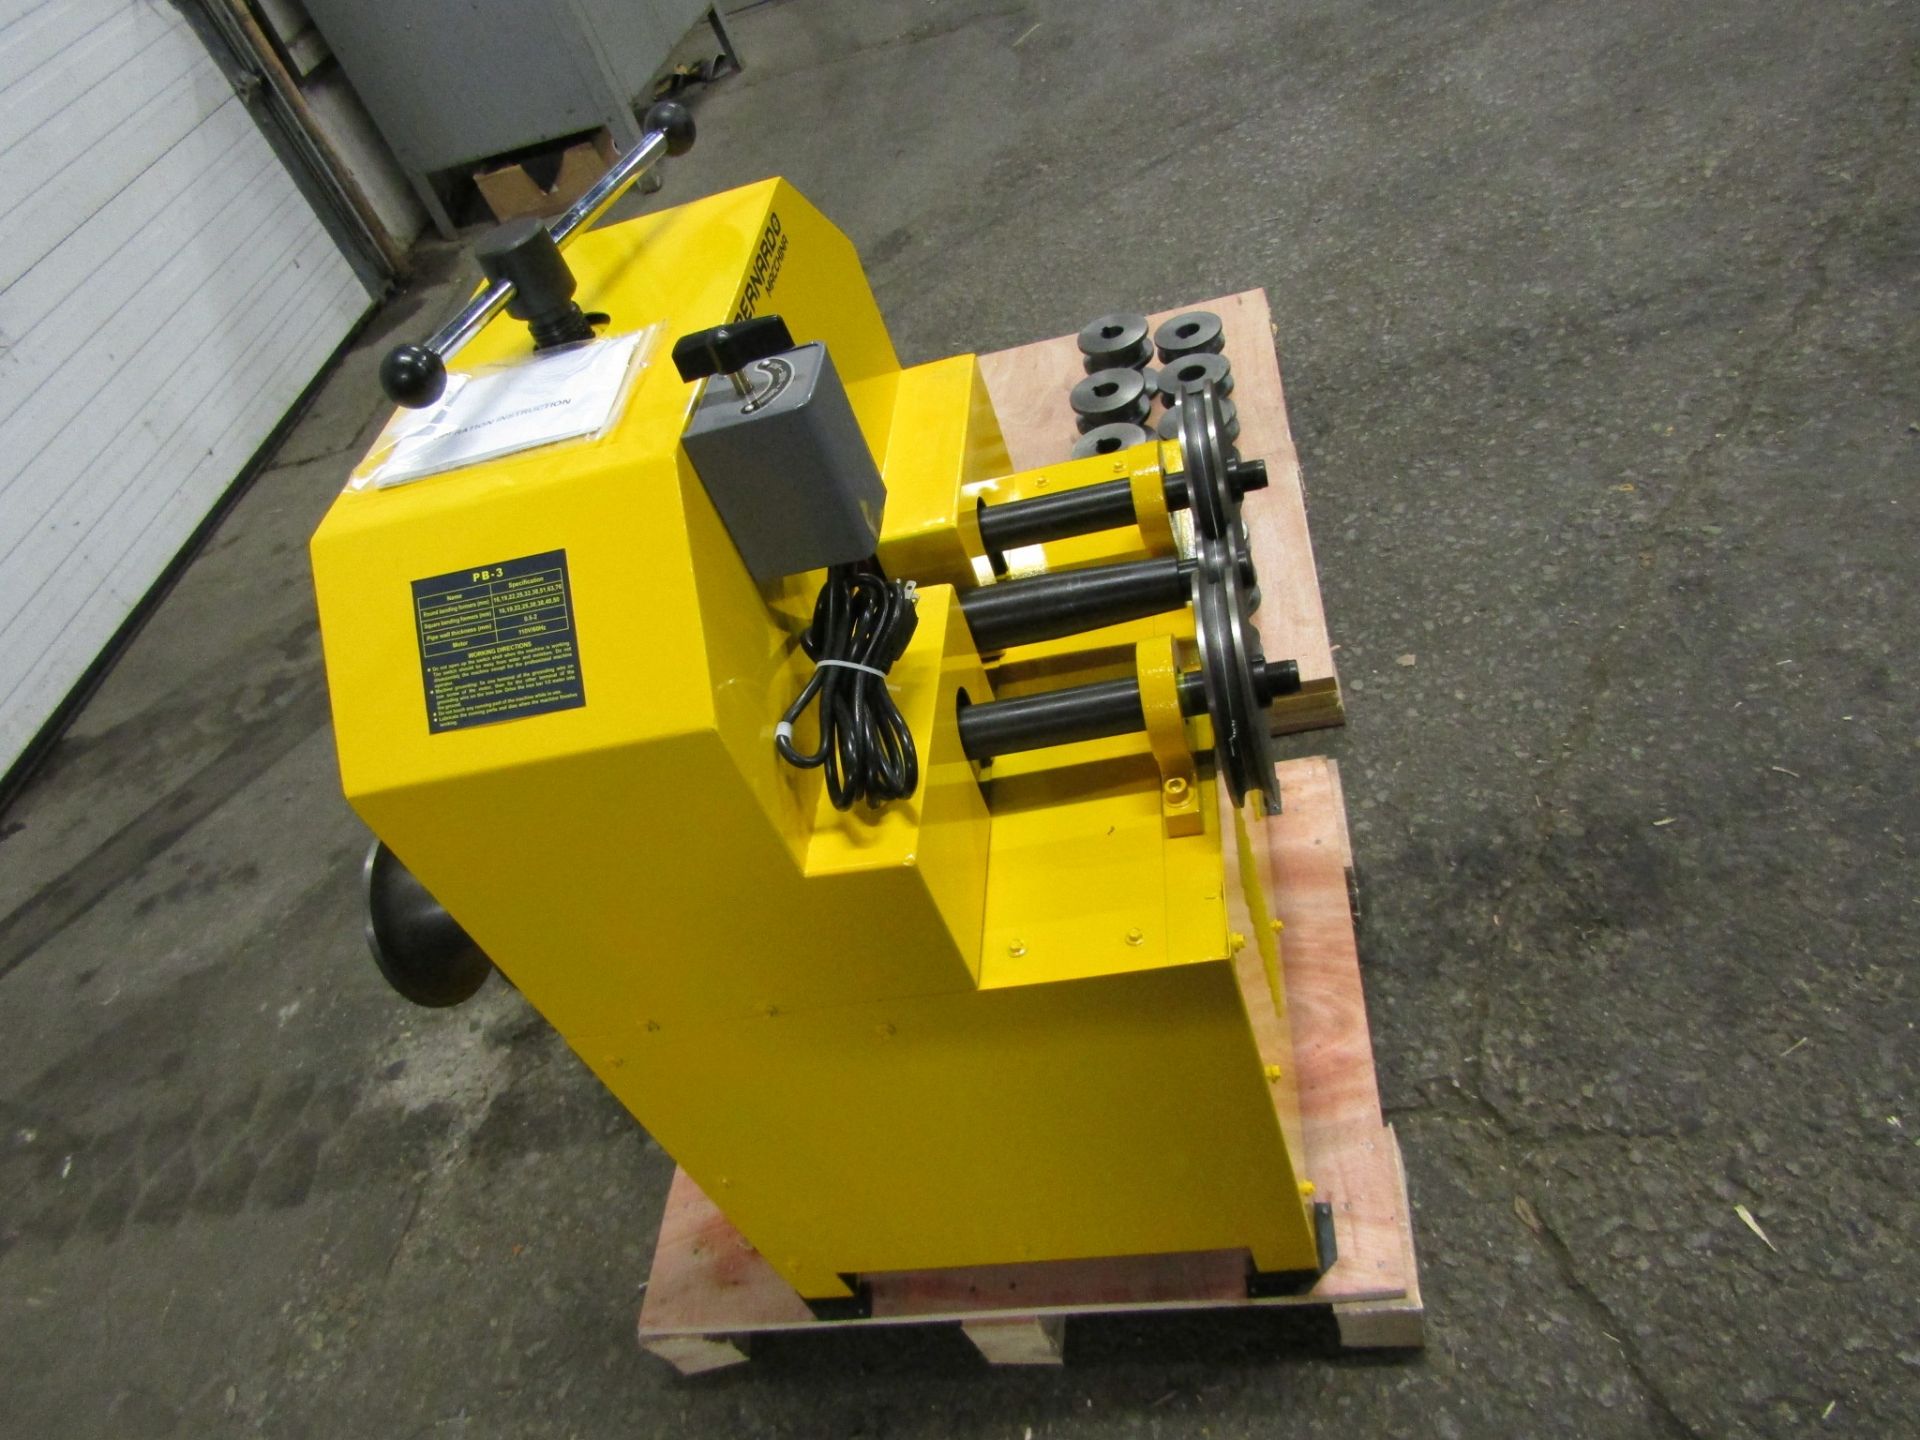 Power Team Hydraulics Electric Powerpack type - 120V single phase hydraulic pump - UNUSED & MINT - Image 3 of 4